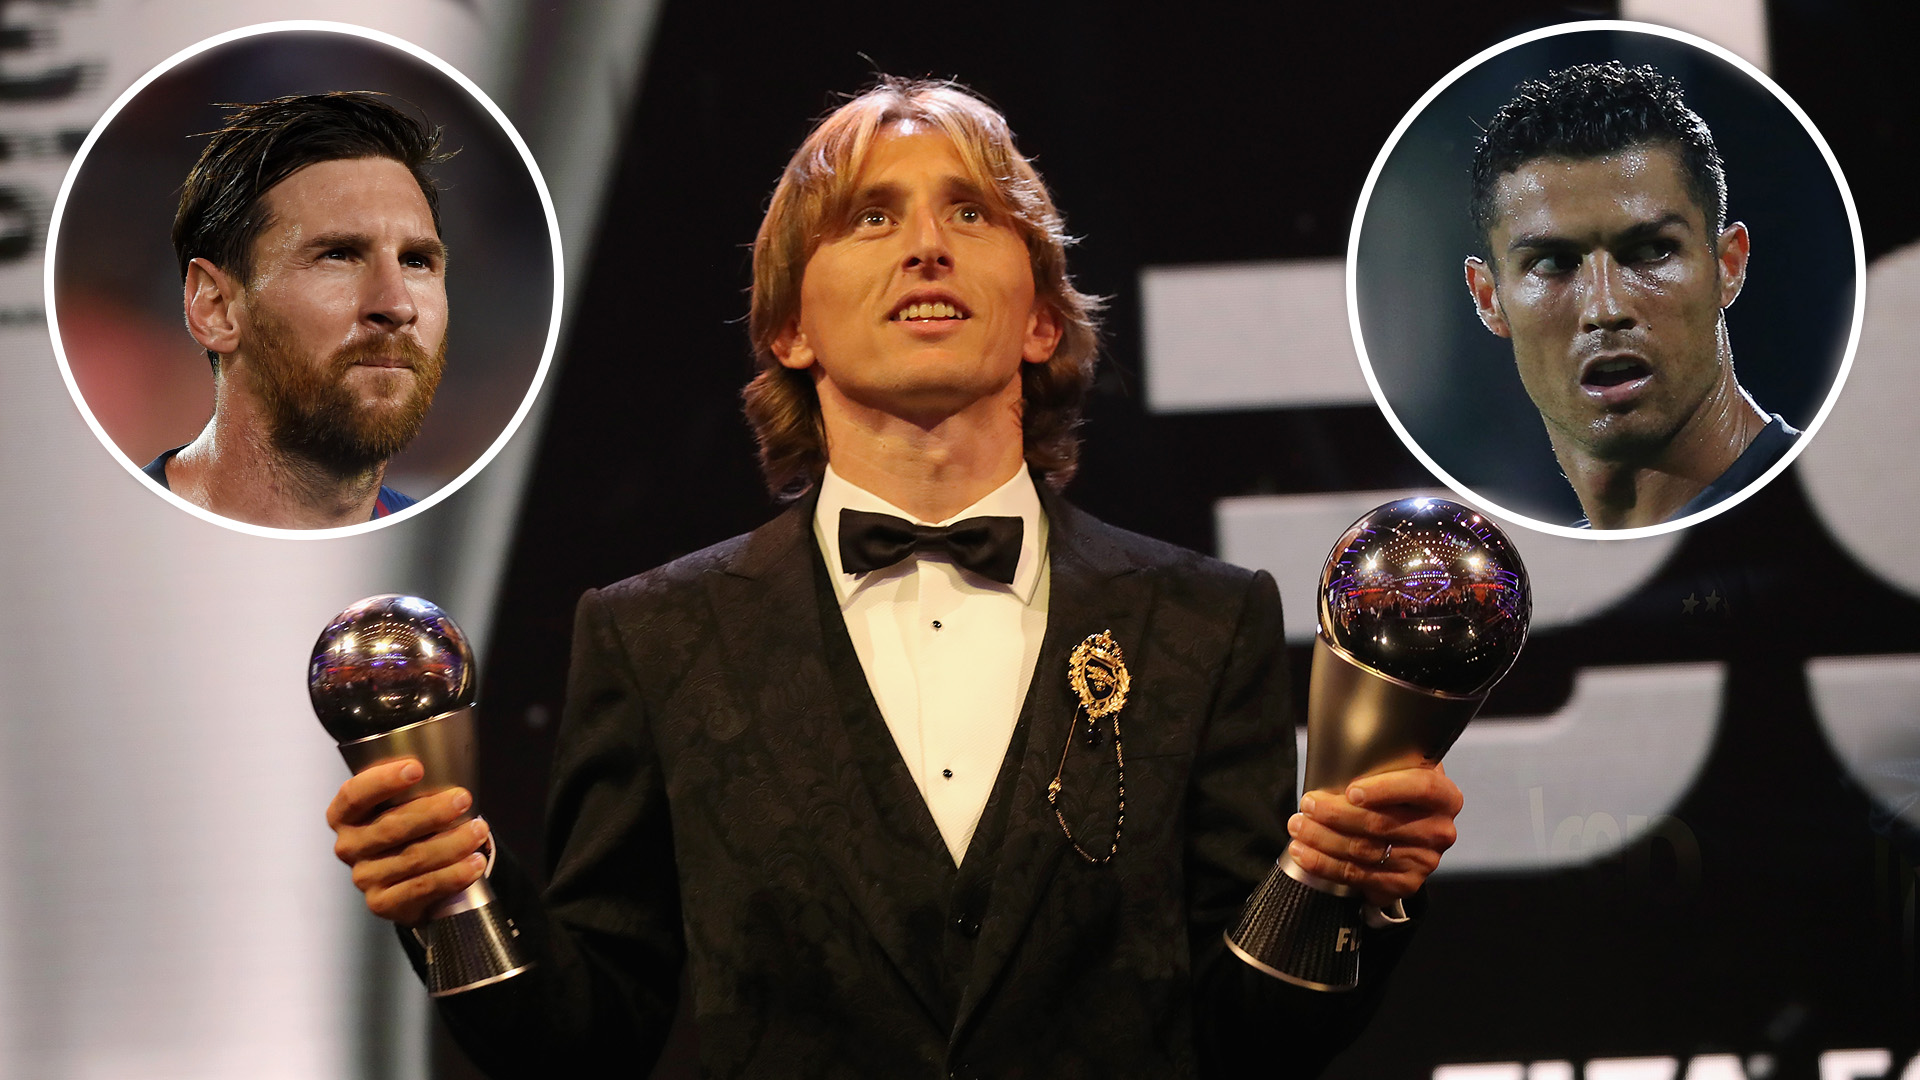 LONDON, ENGLAND - SEPTEMBER 24:  Luka Modric of Croatia and Real Madrid pose for a photo with his The Best FIFA Men's Player Award and FIFA FIFPro World11 award during The Best FIFA Football Awards at Royal Festival Hall on September 24, 2018 in London, England.  (Photo by Alexander Hassenstein - FIFA/FIFA via Getty Images)